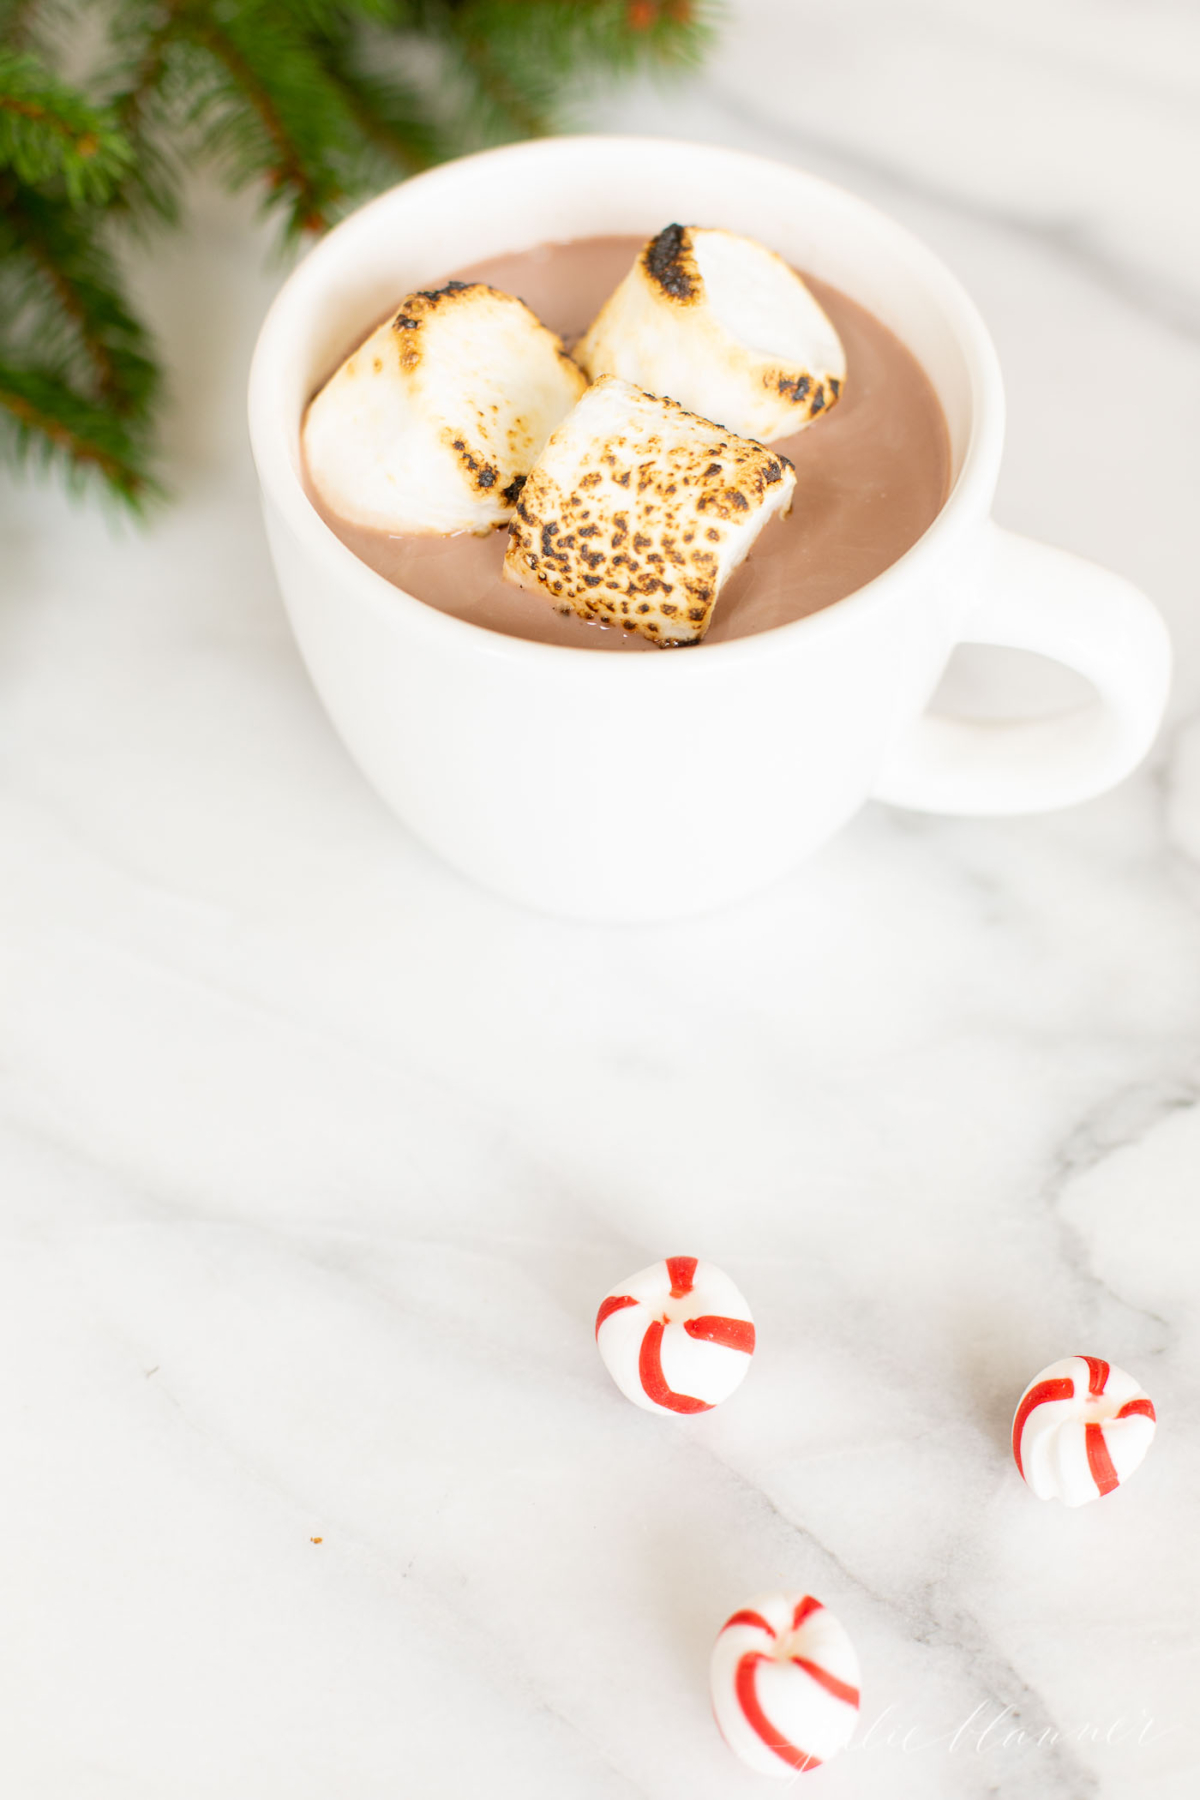 A cup of hot chocolate with marshmallows and a hint of peppermint flavor.